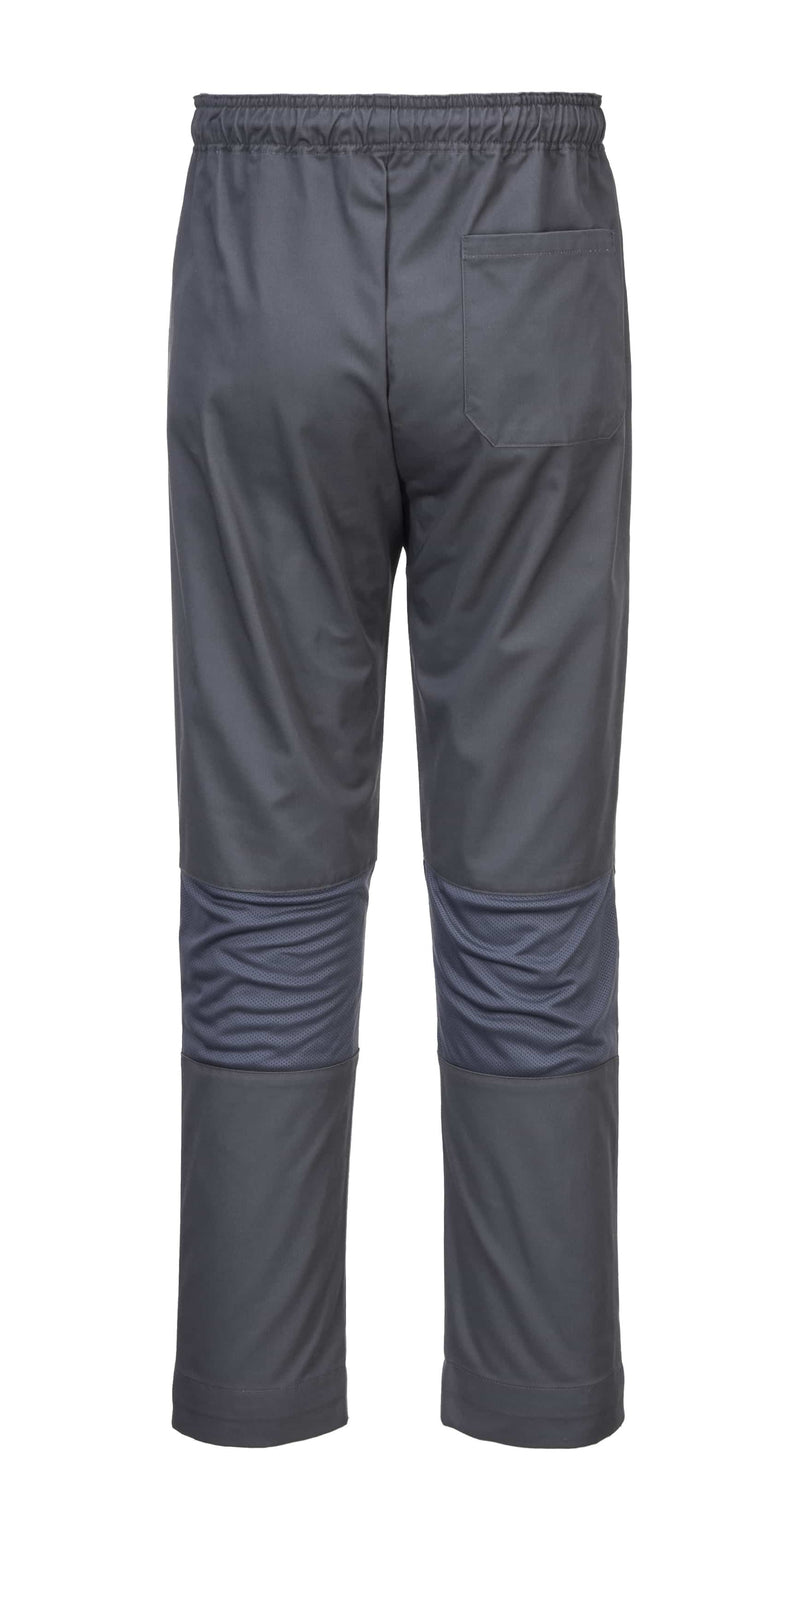 Mesh Air Pro Trousers